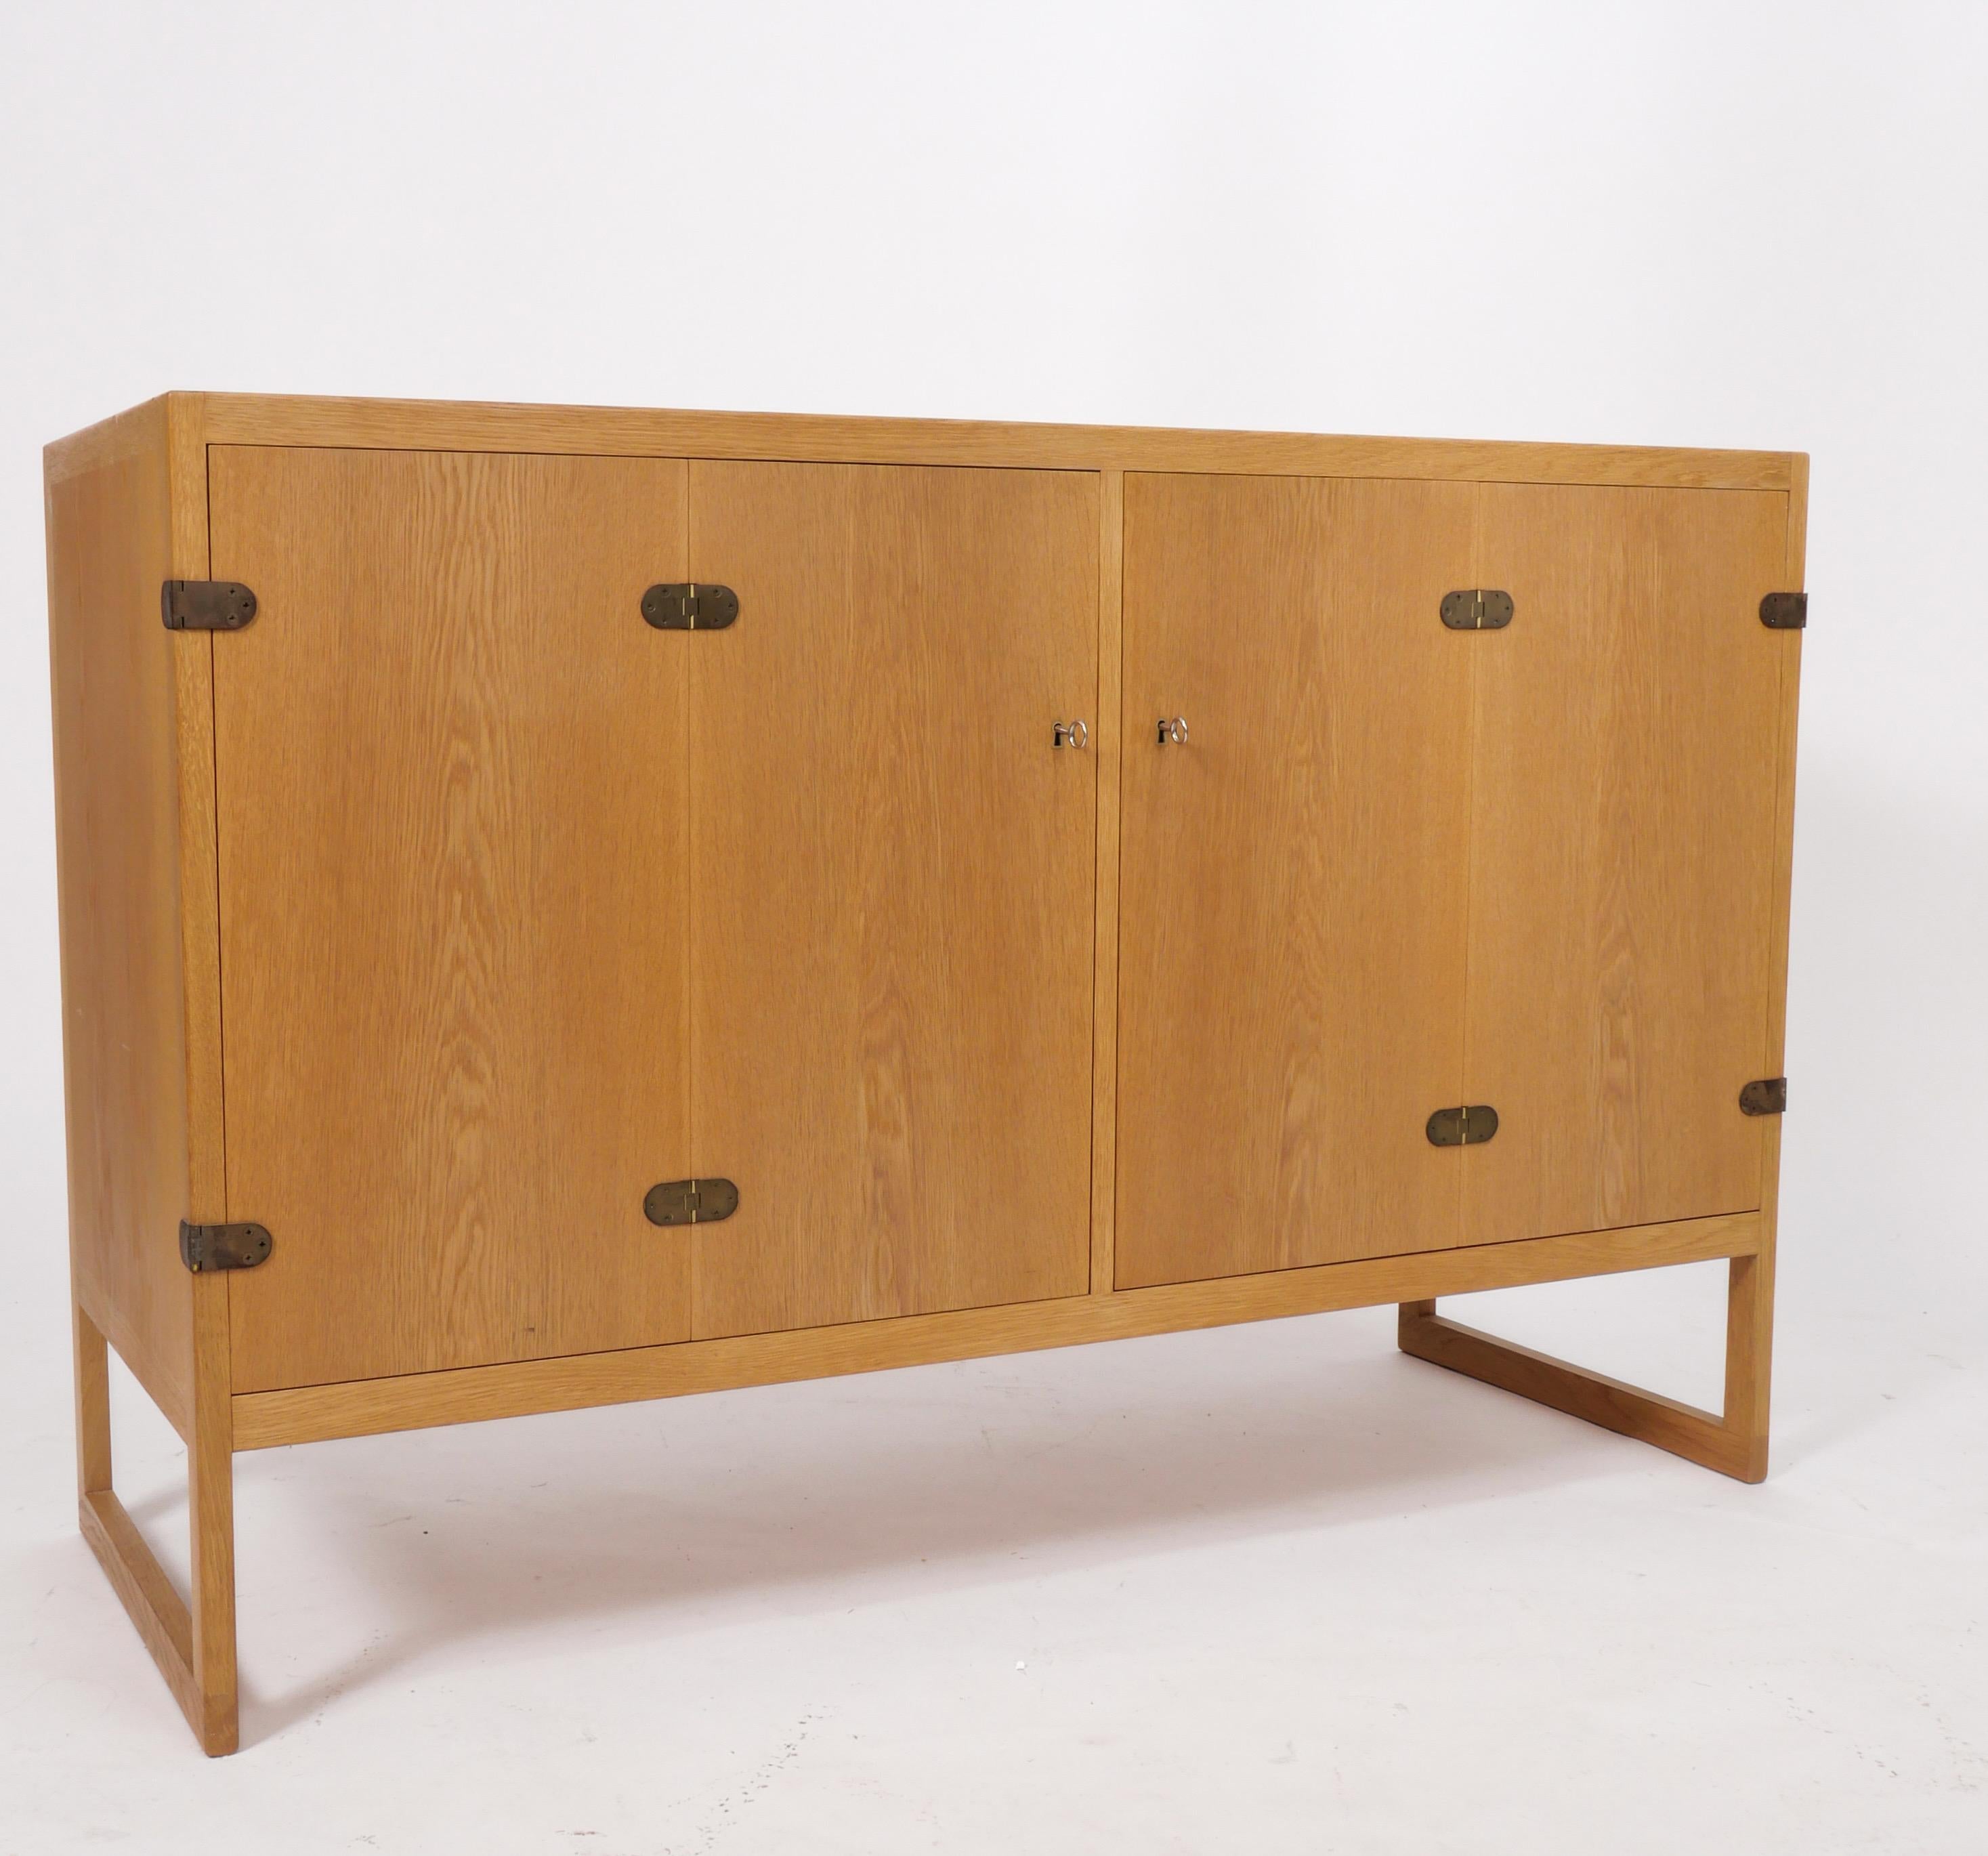 Beautiful cabinet in Oak by Børge Mogensen. Patinated brass hinges at front; locking, folding doors open outward to reveal adjustable shelving as well as two shallow felt-lined drawers. Both door keys present. The cabinet rests on a runner base; the